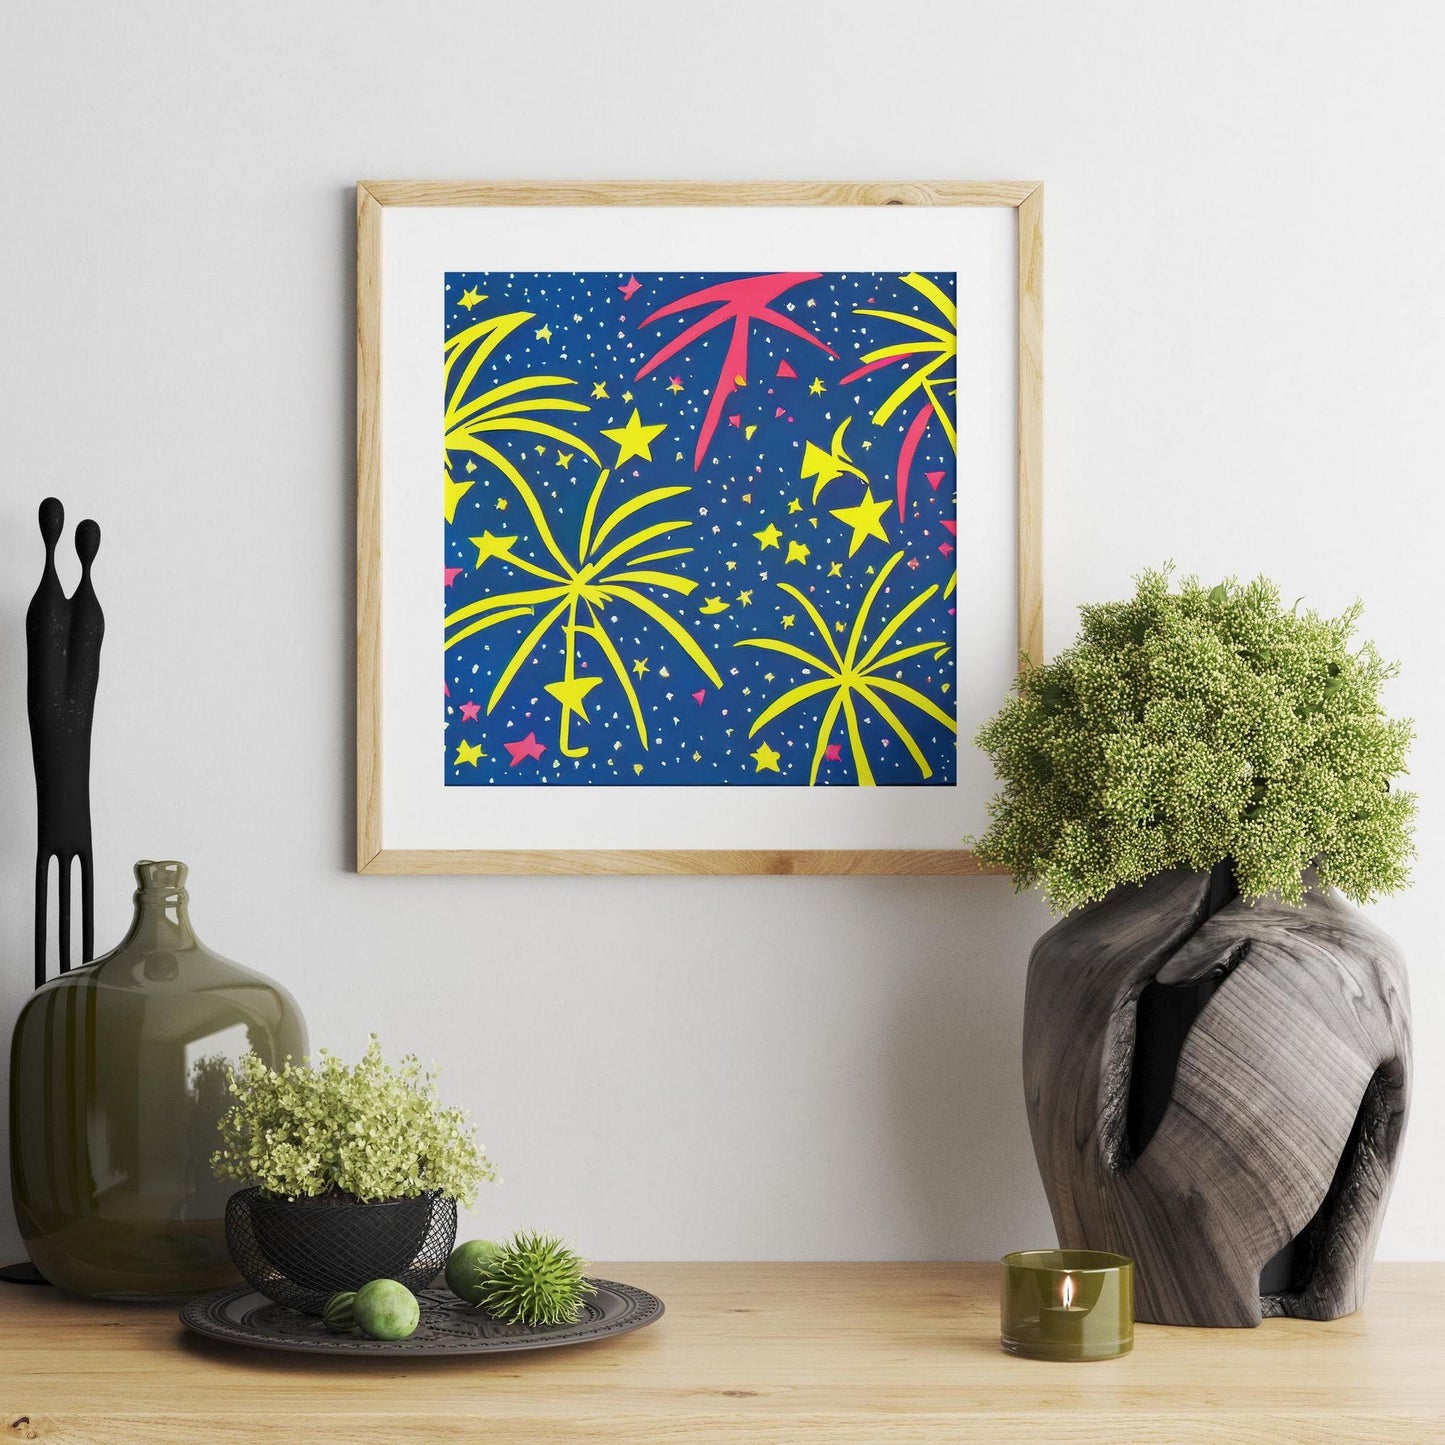 New Year'S Eve Fireworks In The Air Canvas Print, Posters, Abstract Print, Living Room Wall Art, Framed Canvas, Print From Original Painting